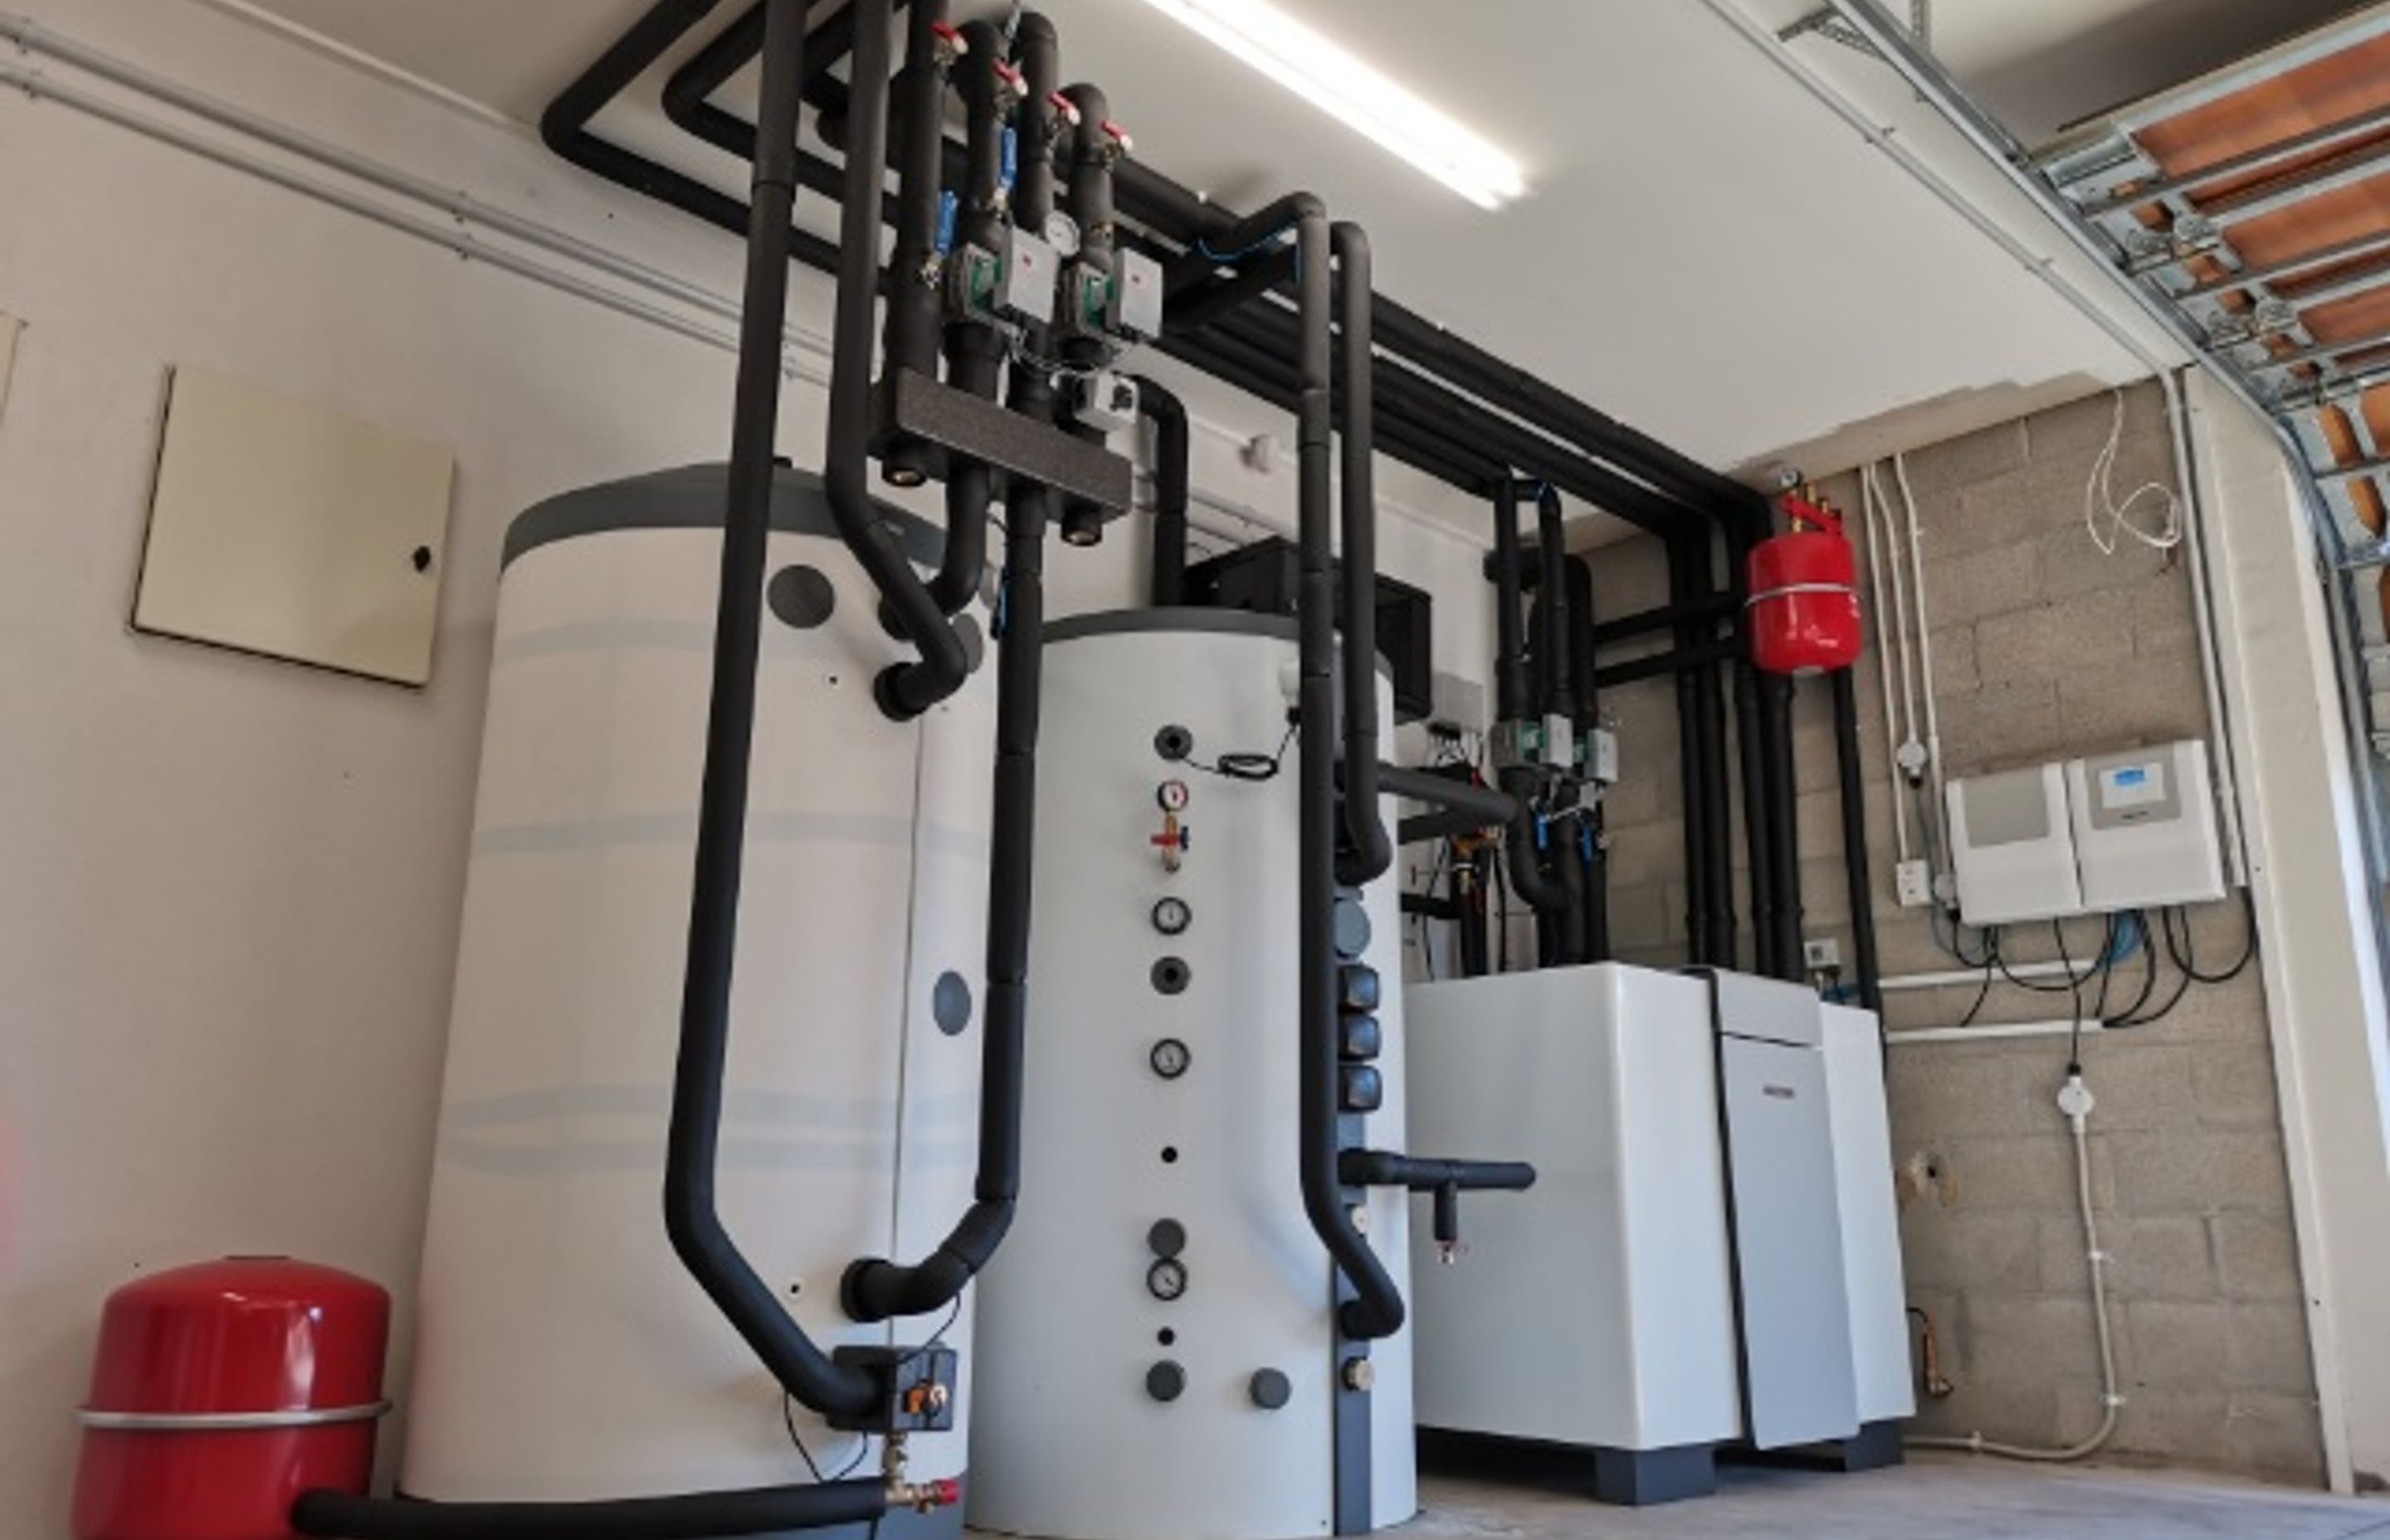 The geothermal hydronic heating heat pump system installed at the Pumpkin Hill House, comprising (from right) a WPF 35 heat pump, 700l buffer tank and 800l instantaneous hot water tank.